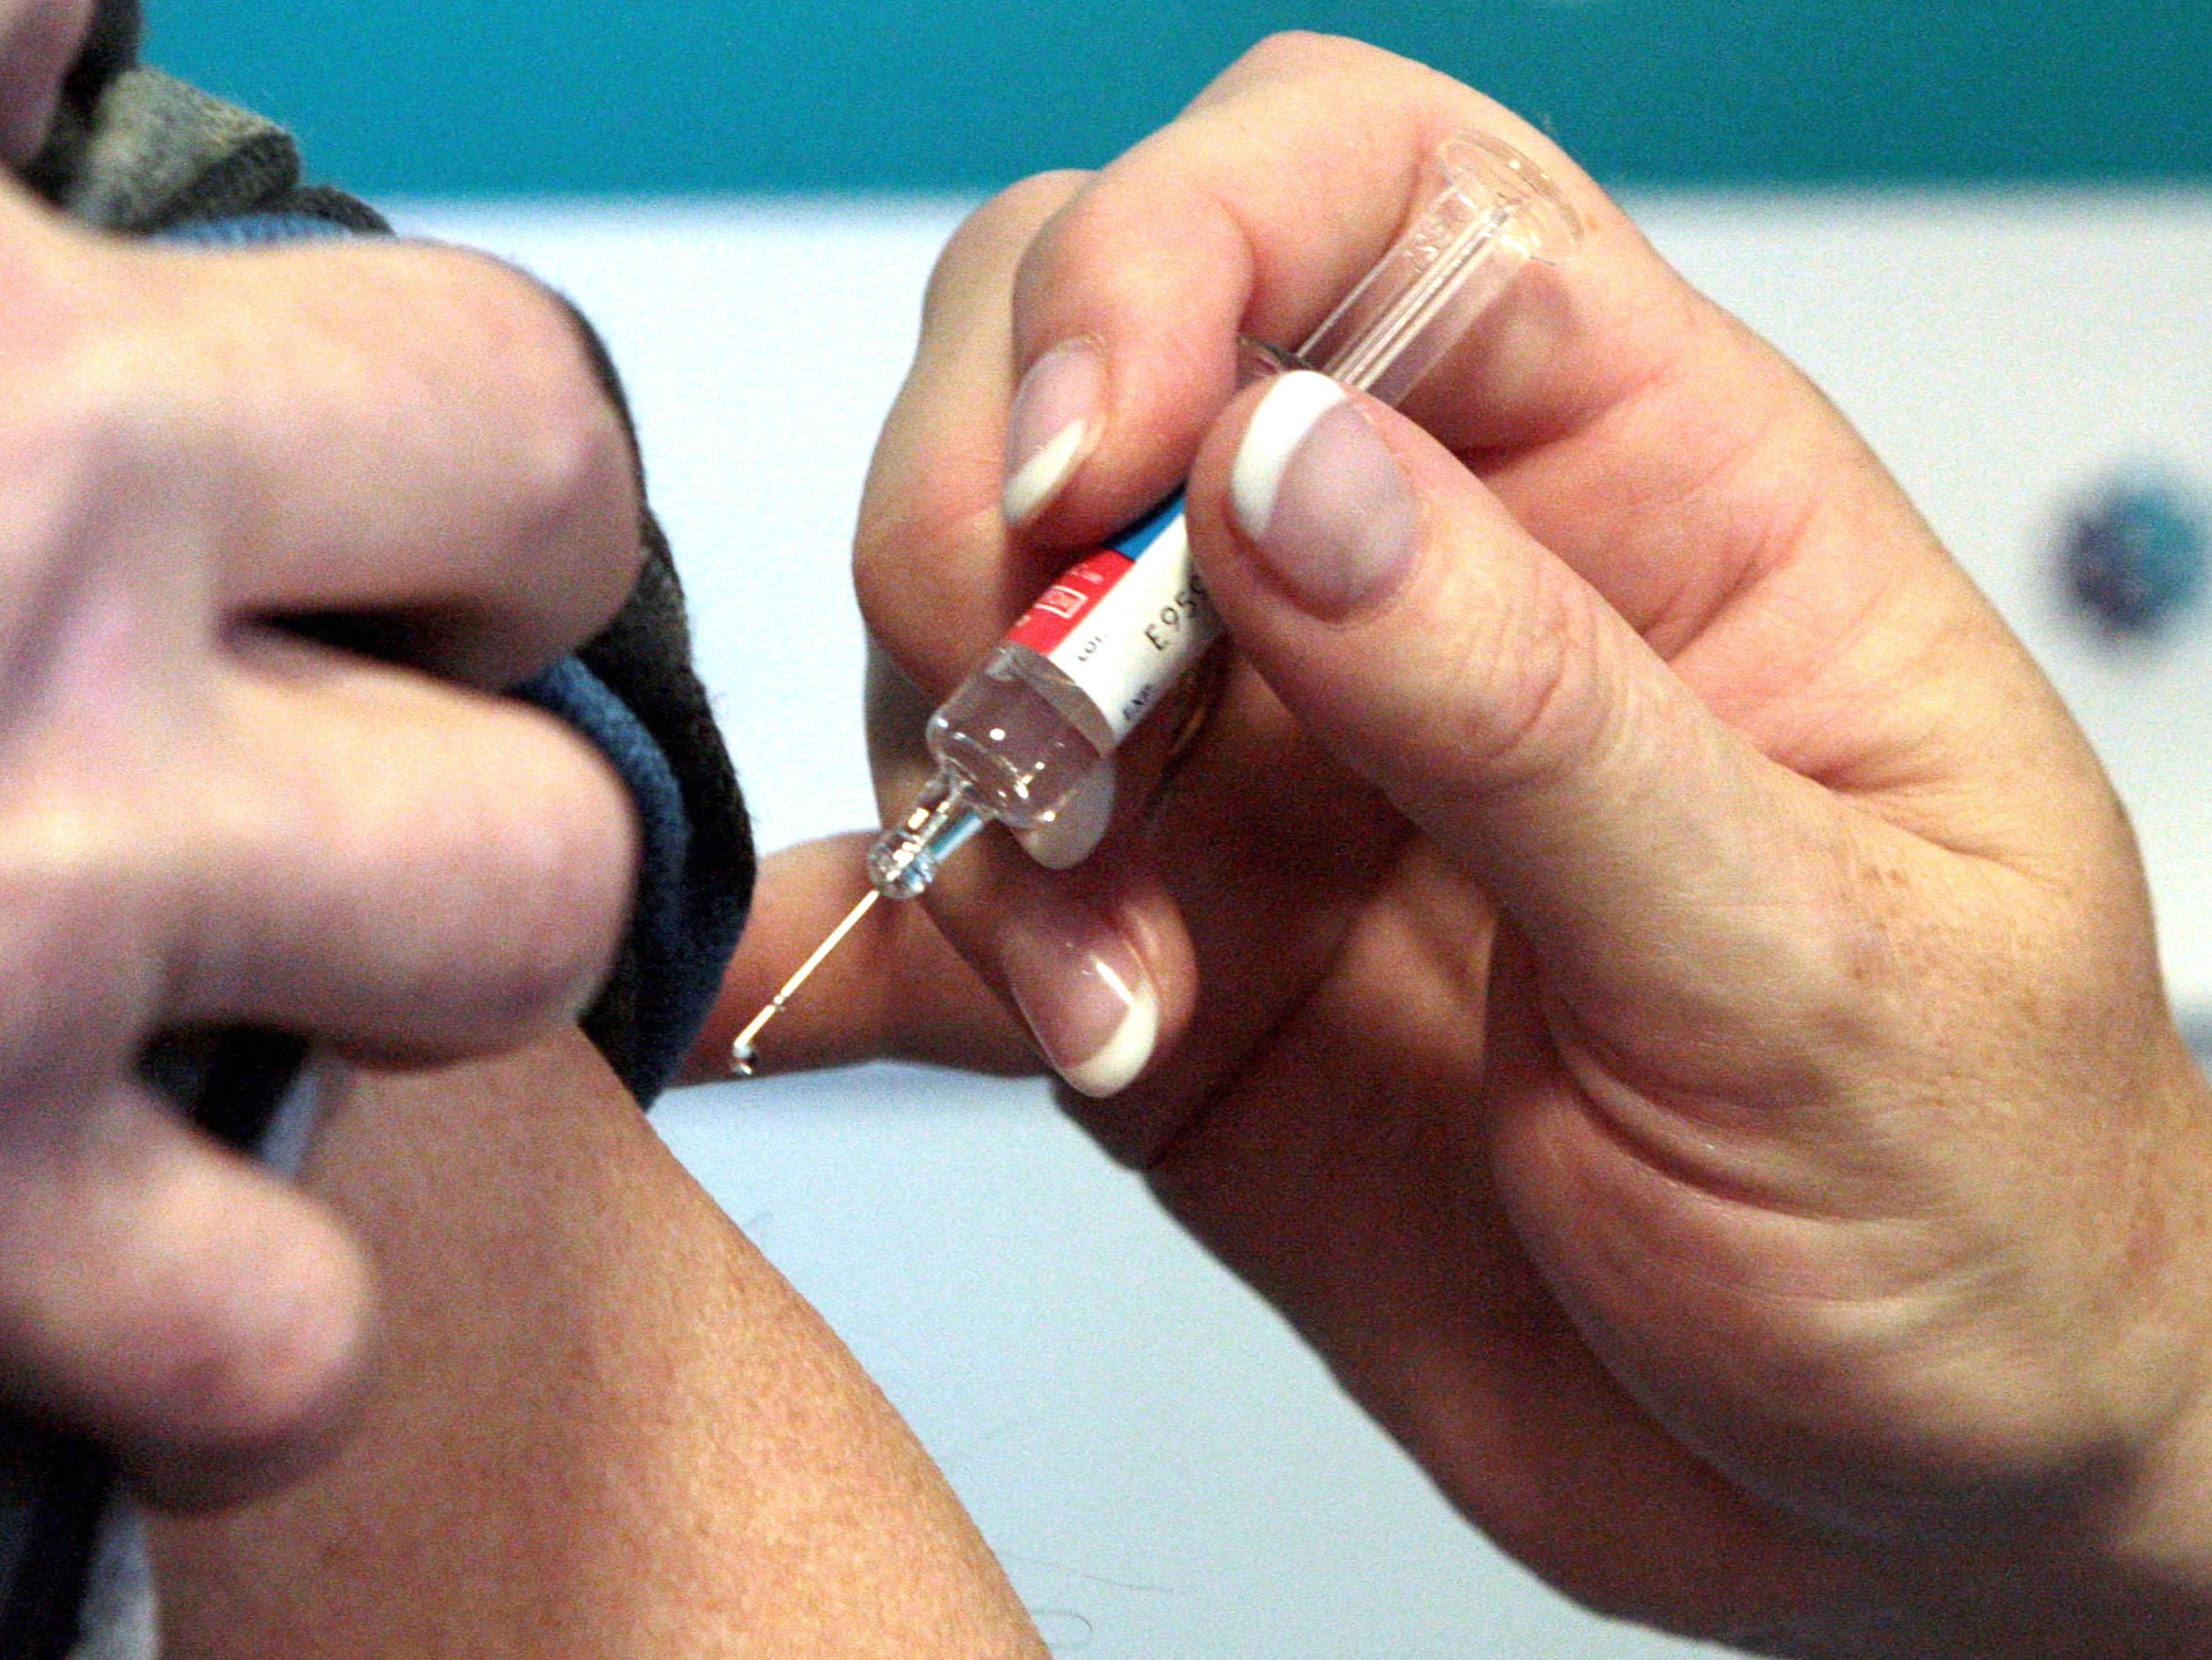 Particpants on the Oxford University Coronavirus trial have been told not share their swabs